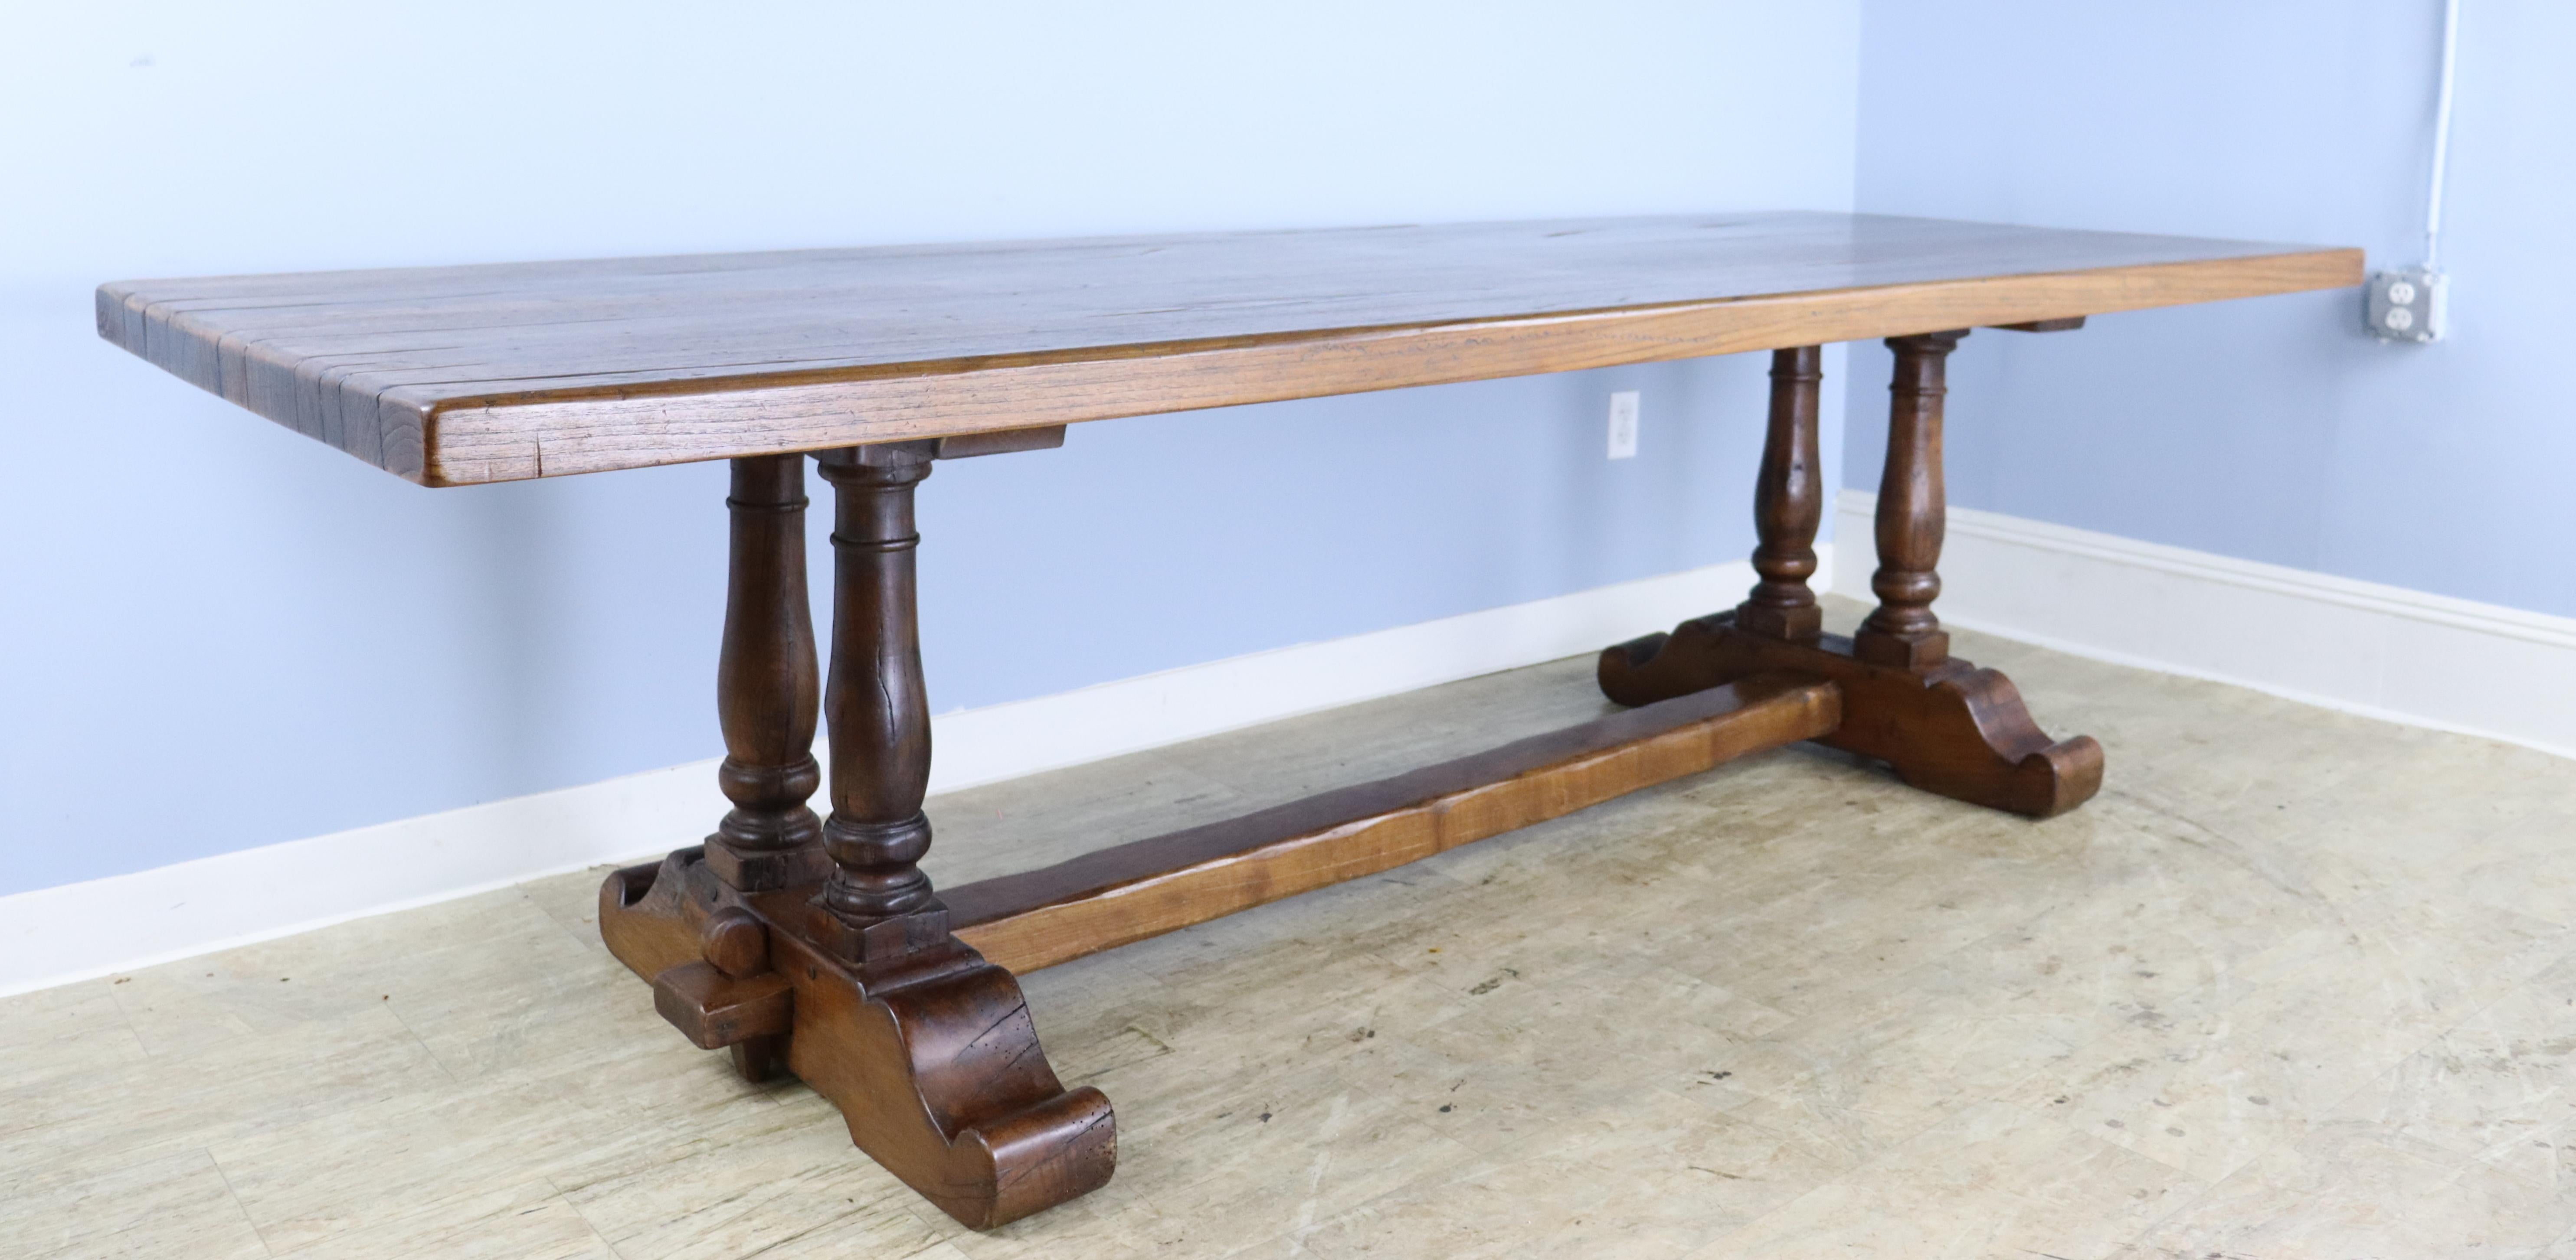 An eye catching oak dining table with stunning double barrel legs and a pretty trestle base.  The 2.25